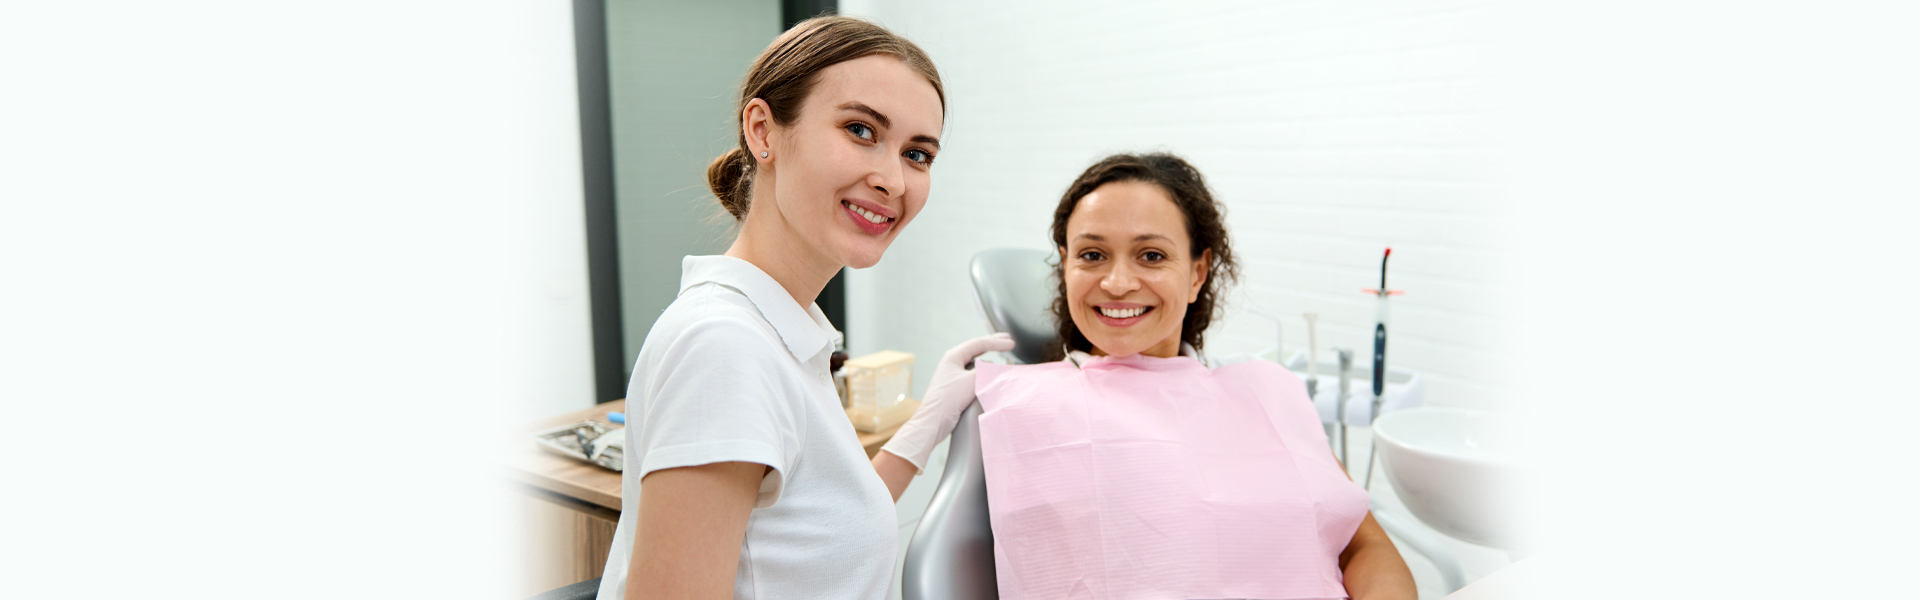 In How Many Ways Does Restorative Dentistry Improve Your Teeth?